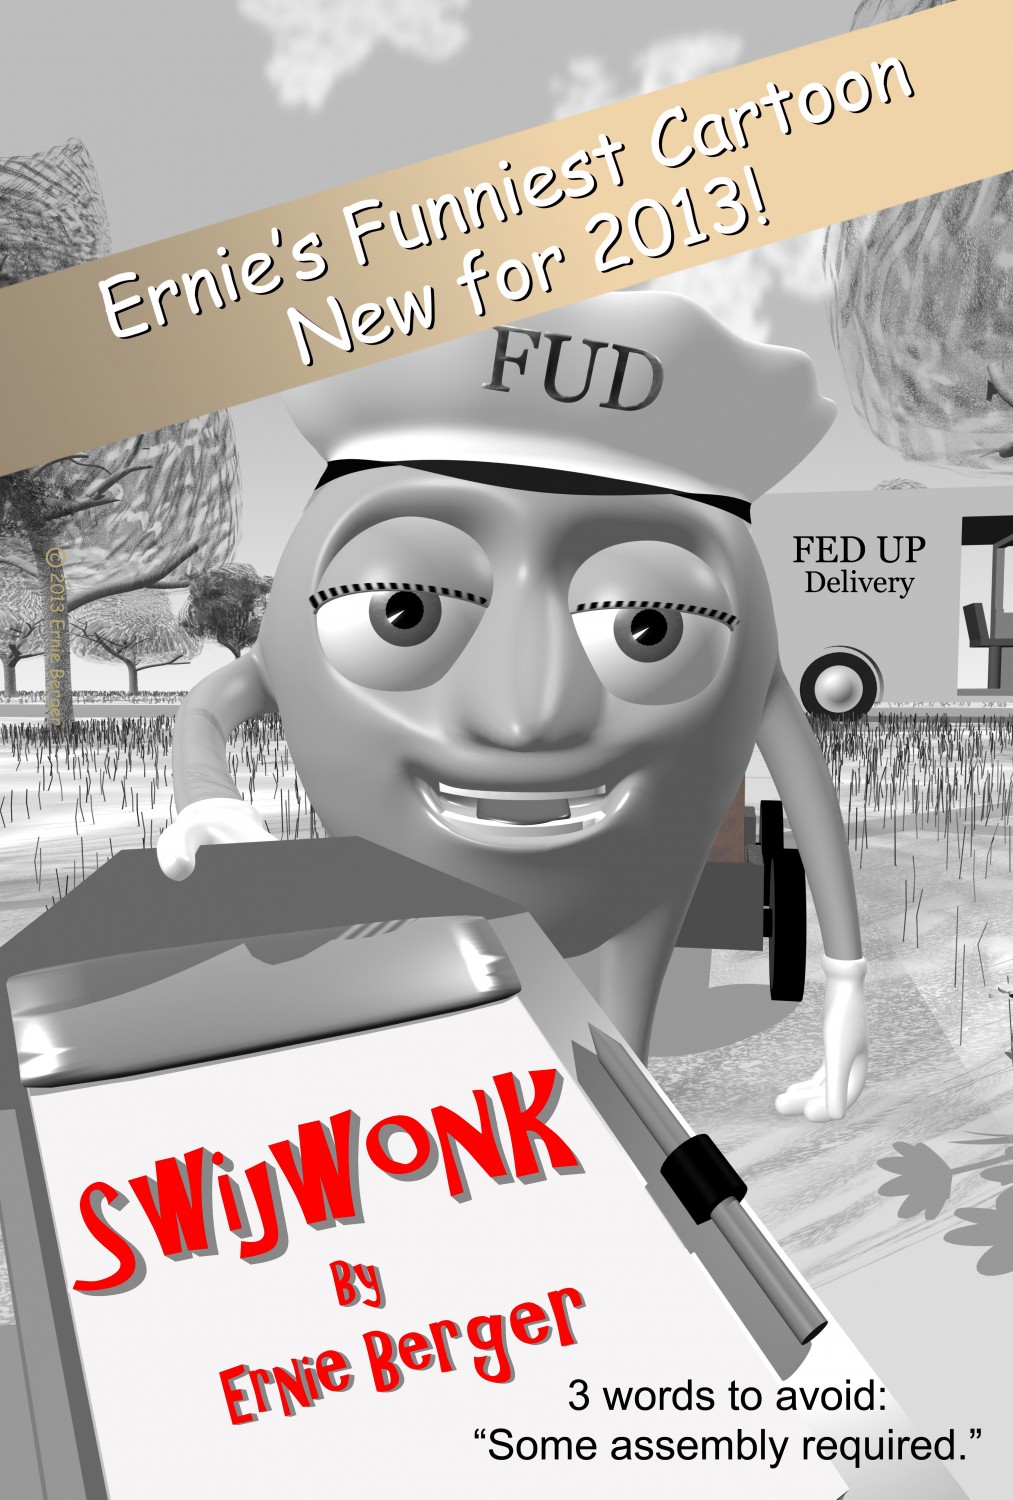 Extra Large Movie Poster Image for Swijwonk